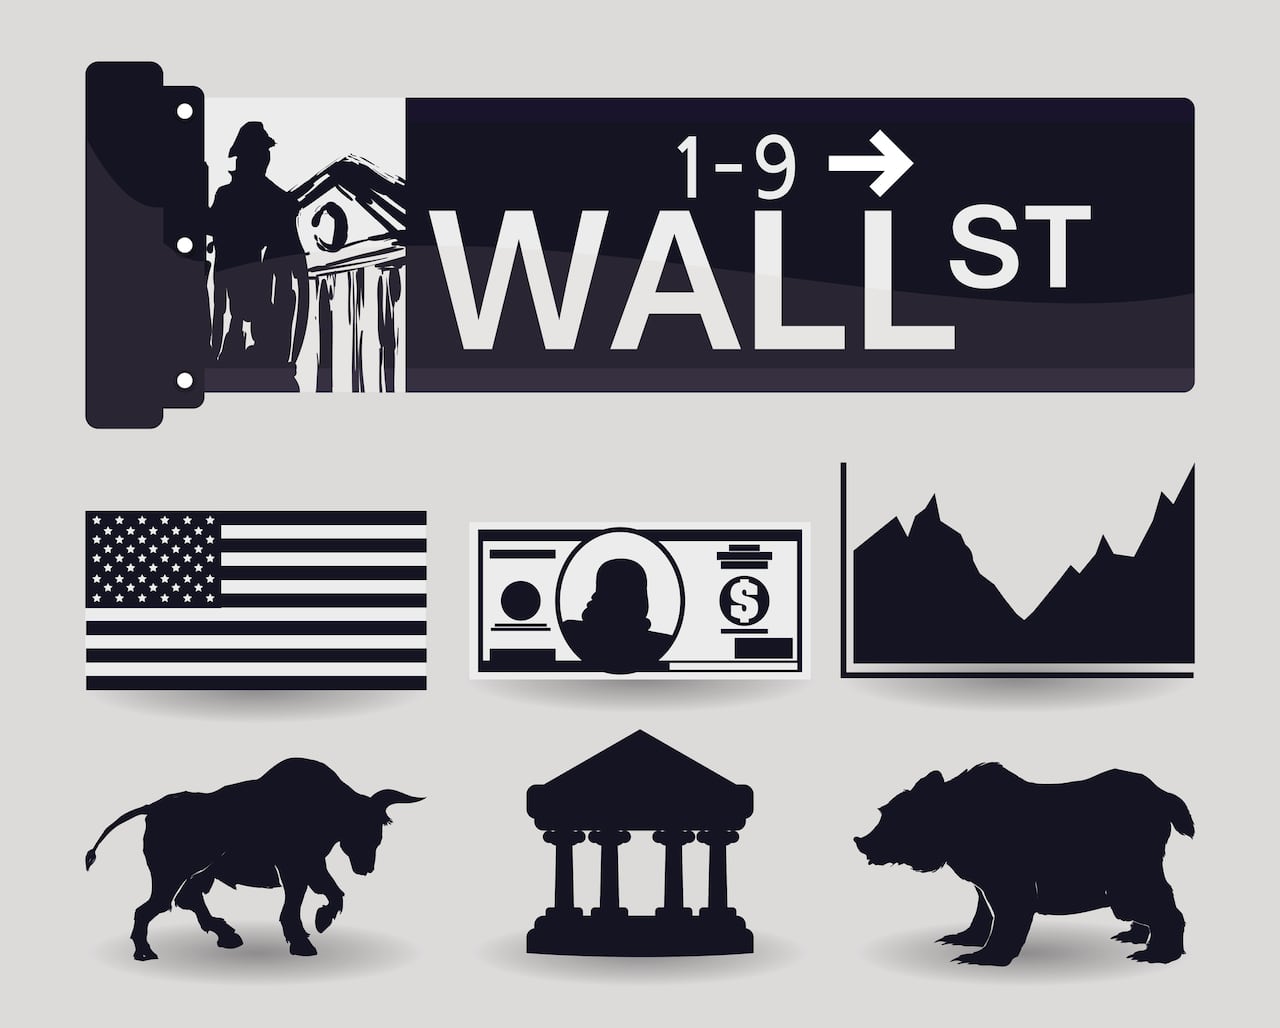 Wall Street - Indicadores - Traders